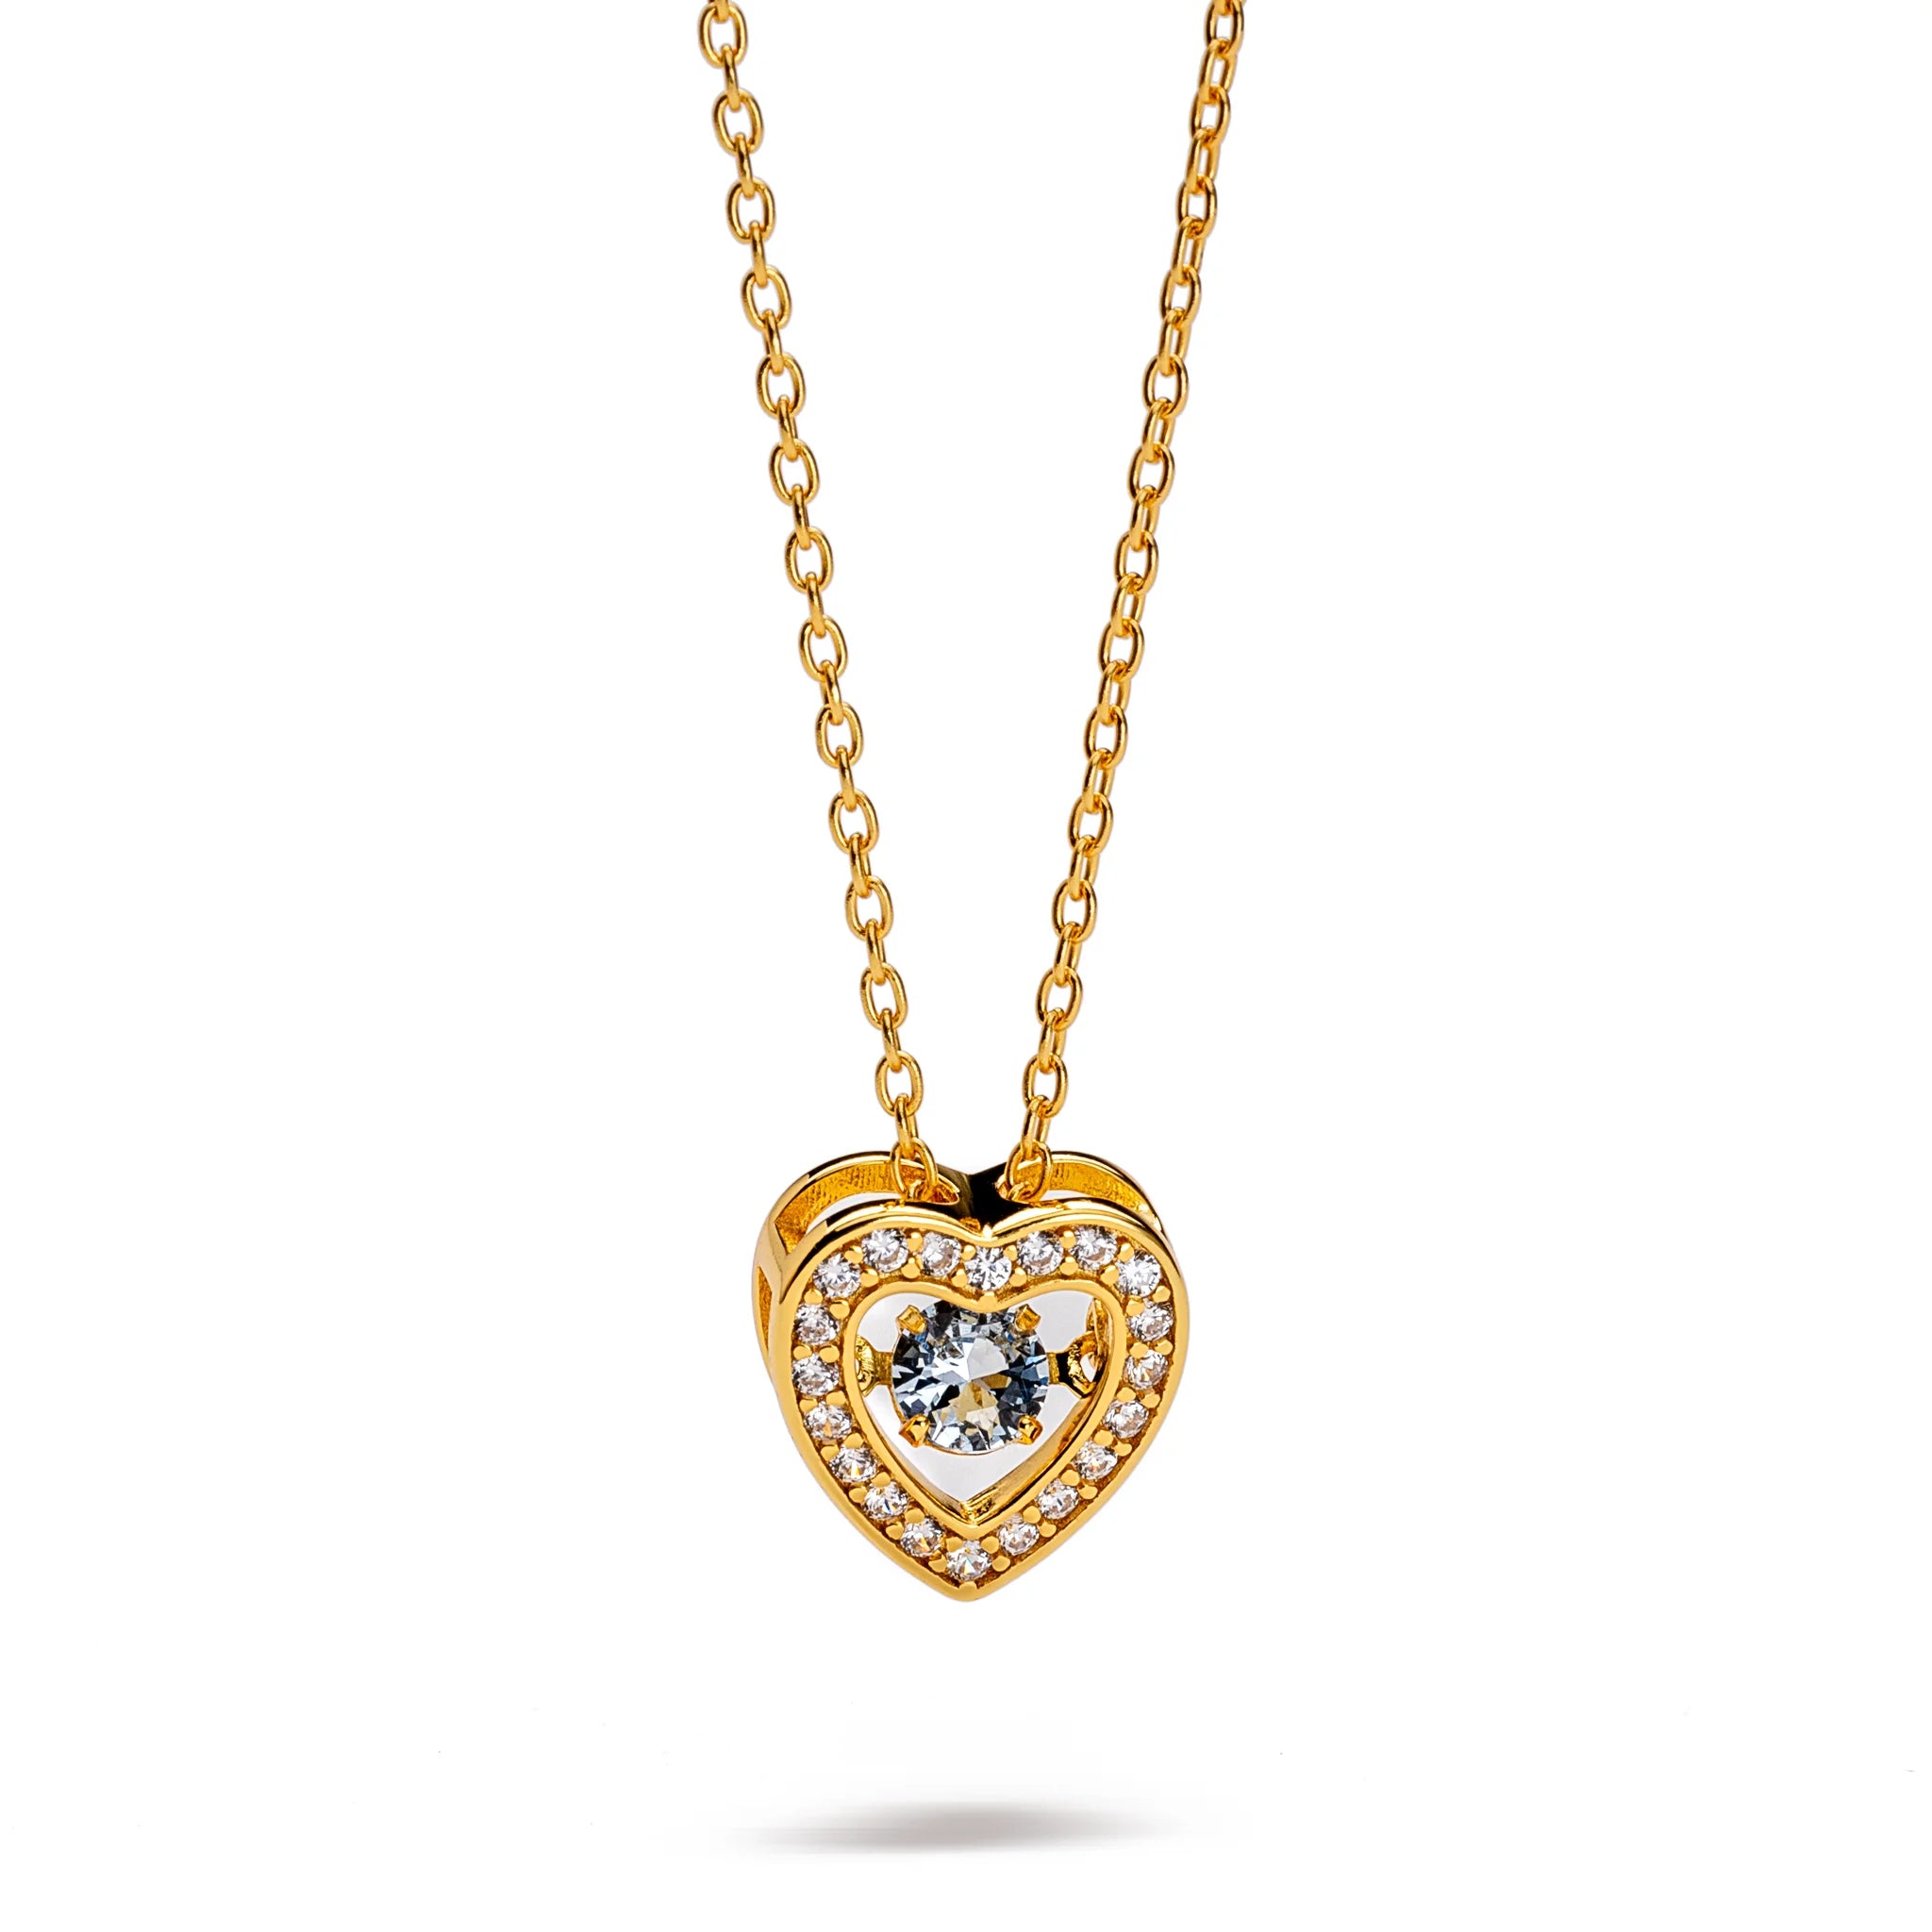 The Lieze Birth Stone Gold Plated Heart Necklace N303